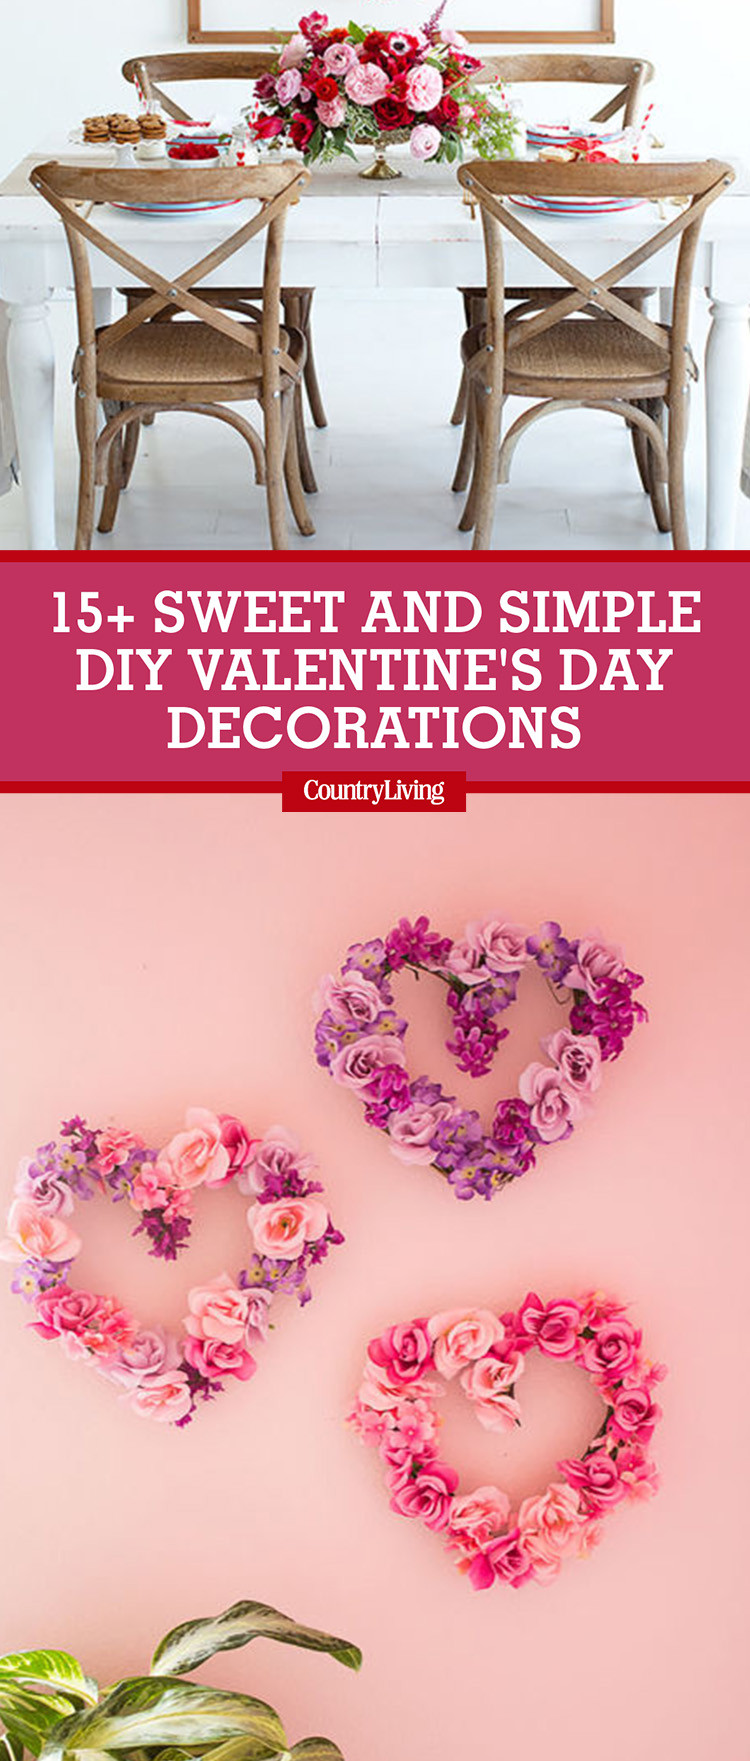 DIY Valentines Day Decorations
 18 Sweet and Simple DIY Valentine s Day Decorations